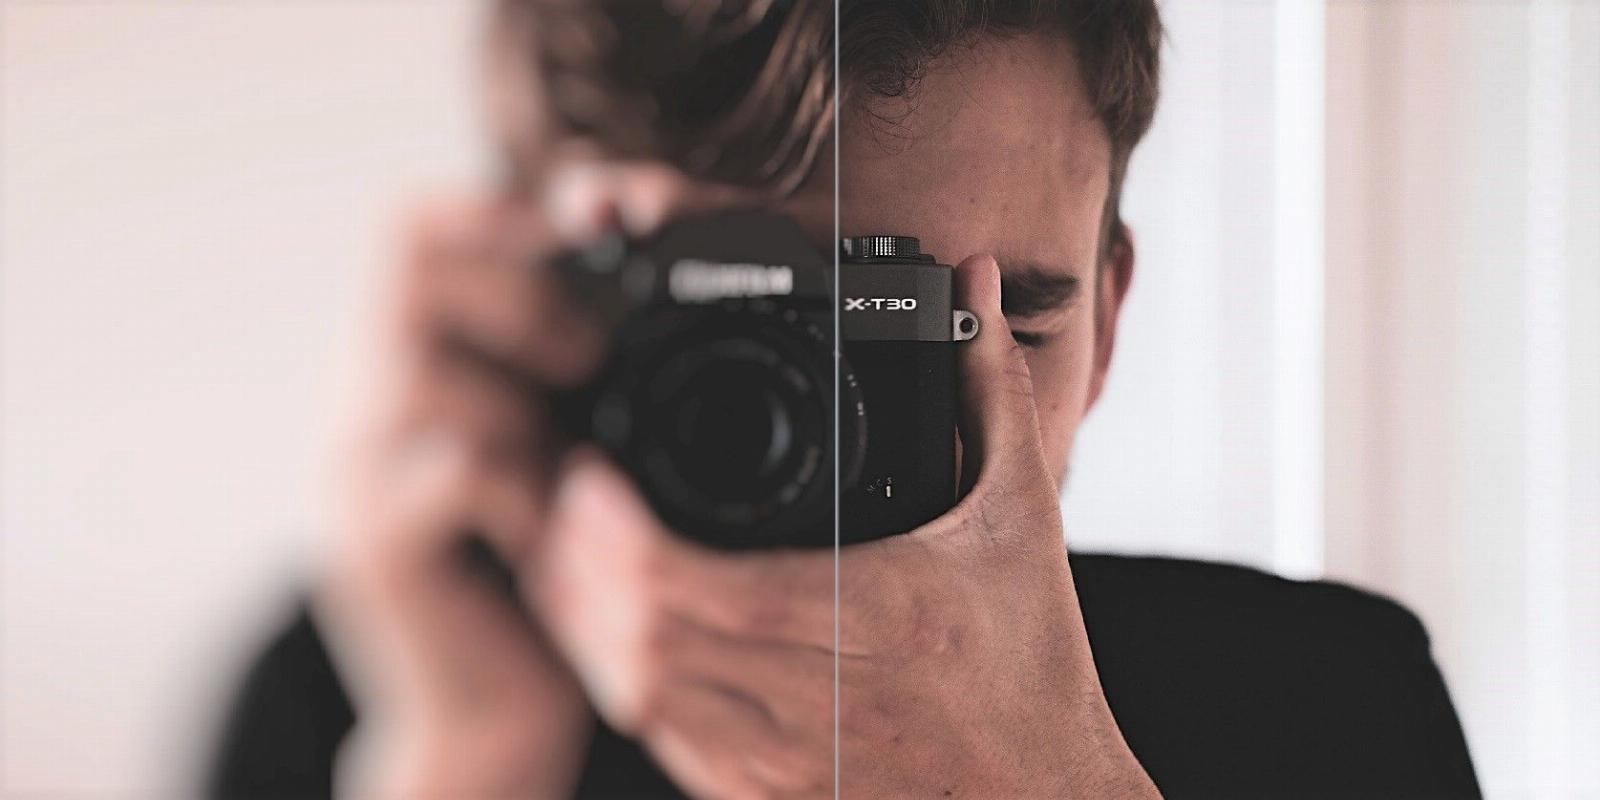 Need to Fix a Blurry Image? Try These 5 Online Tools